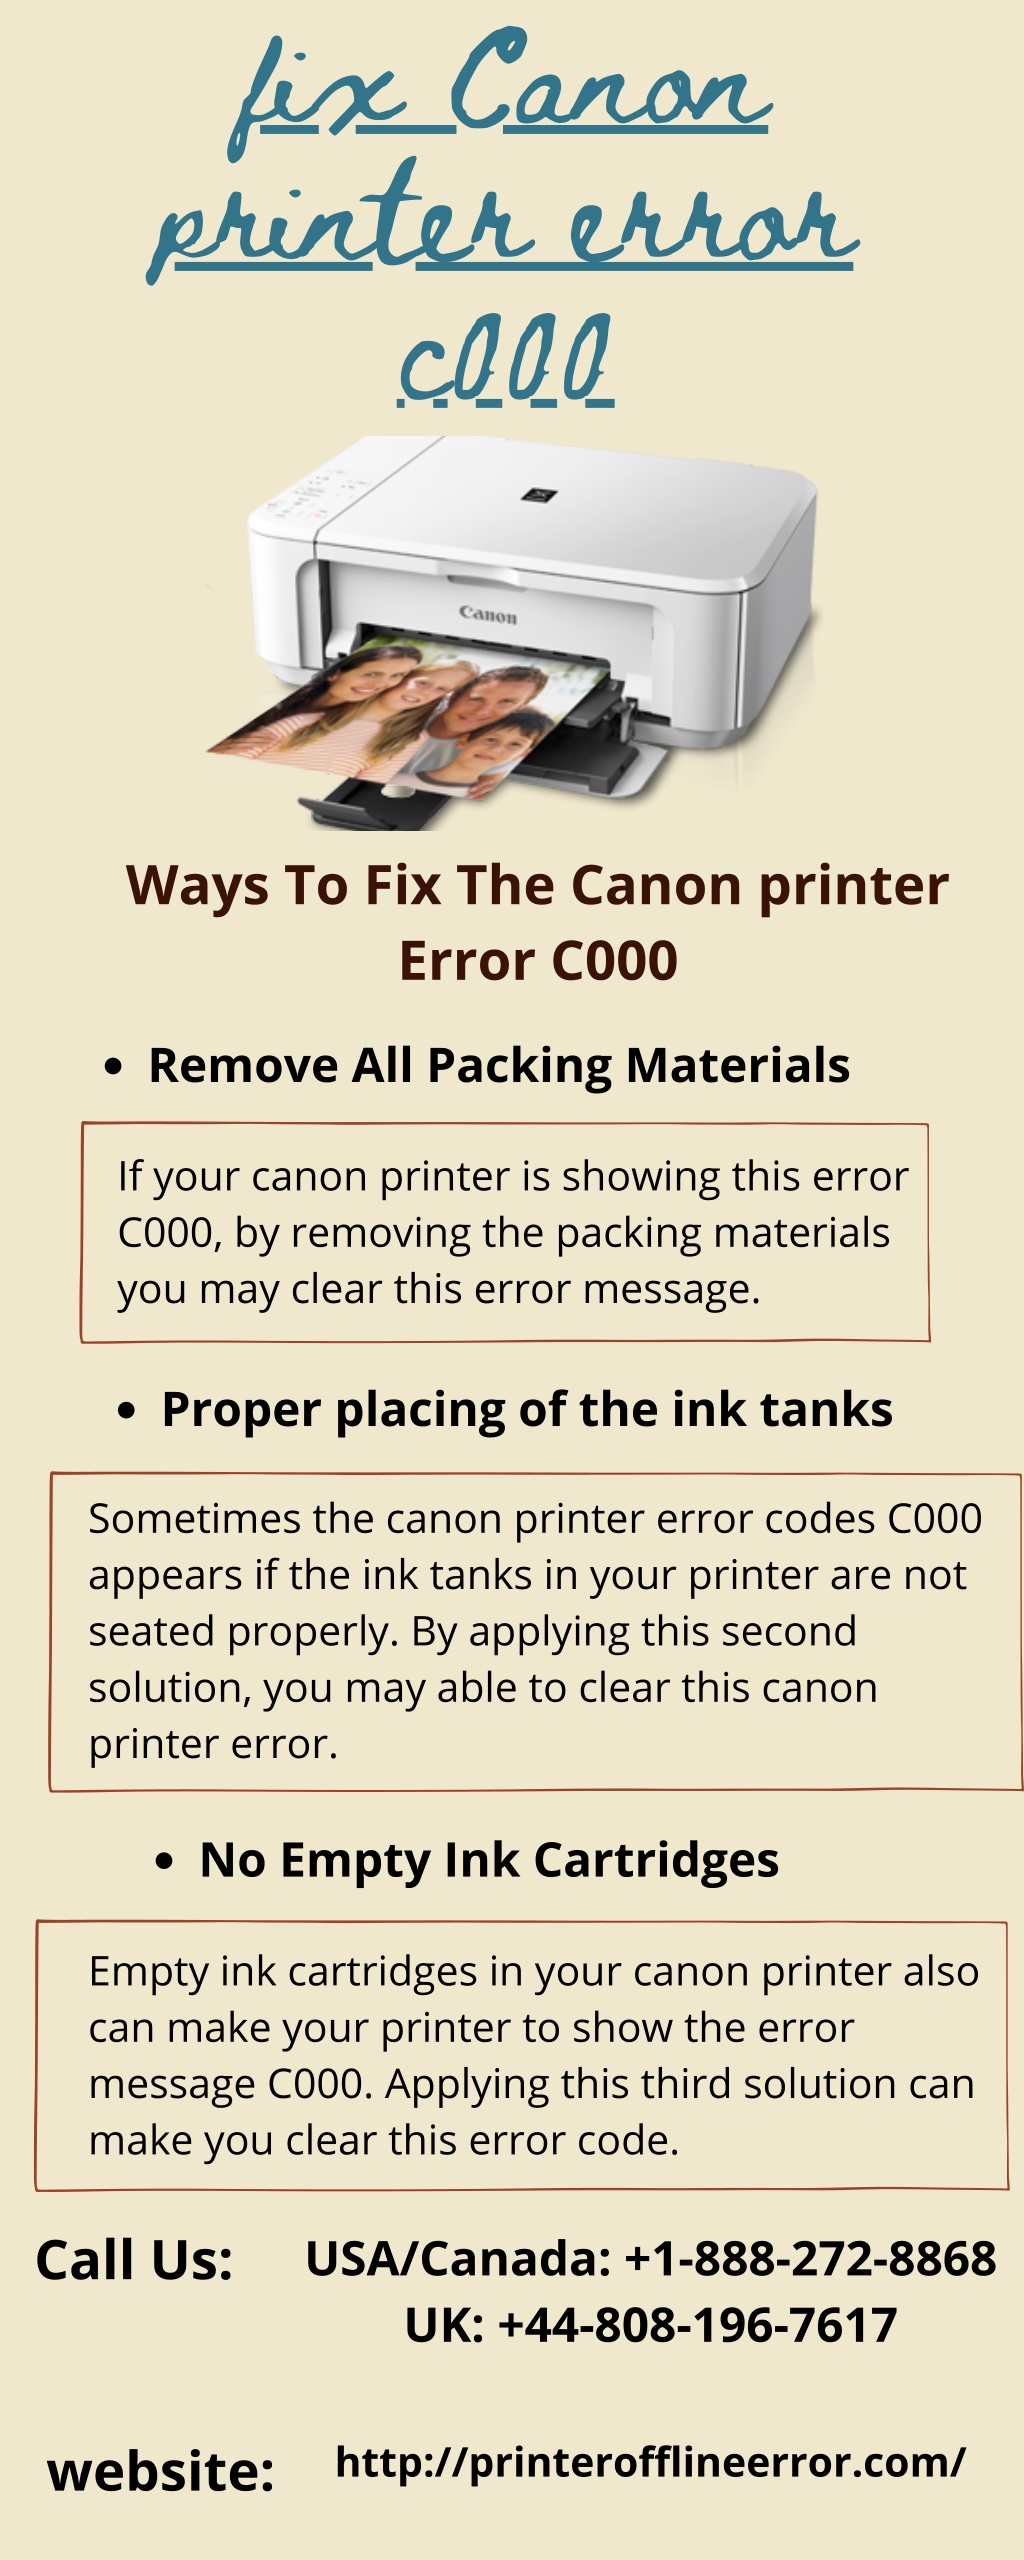 Ppt Guide To Fix Canon Printer Error C000 Powerpoint Presentation Free Download Id10801581 7993